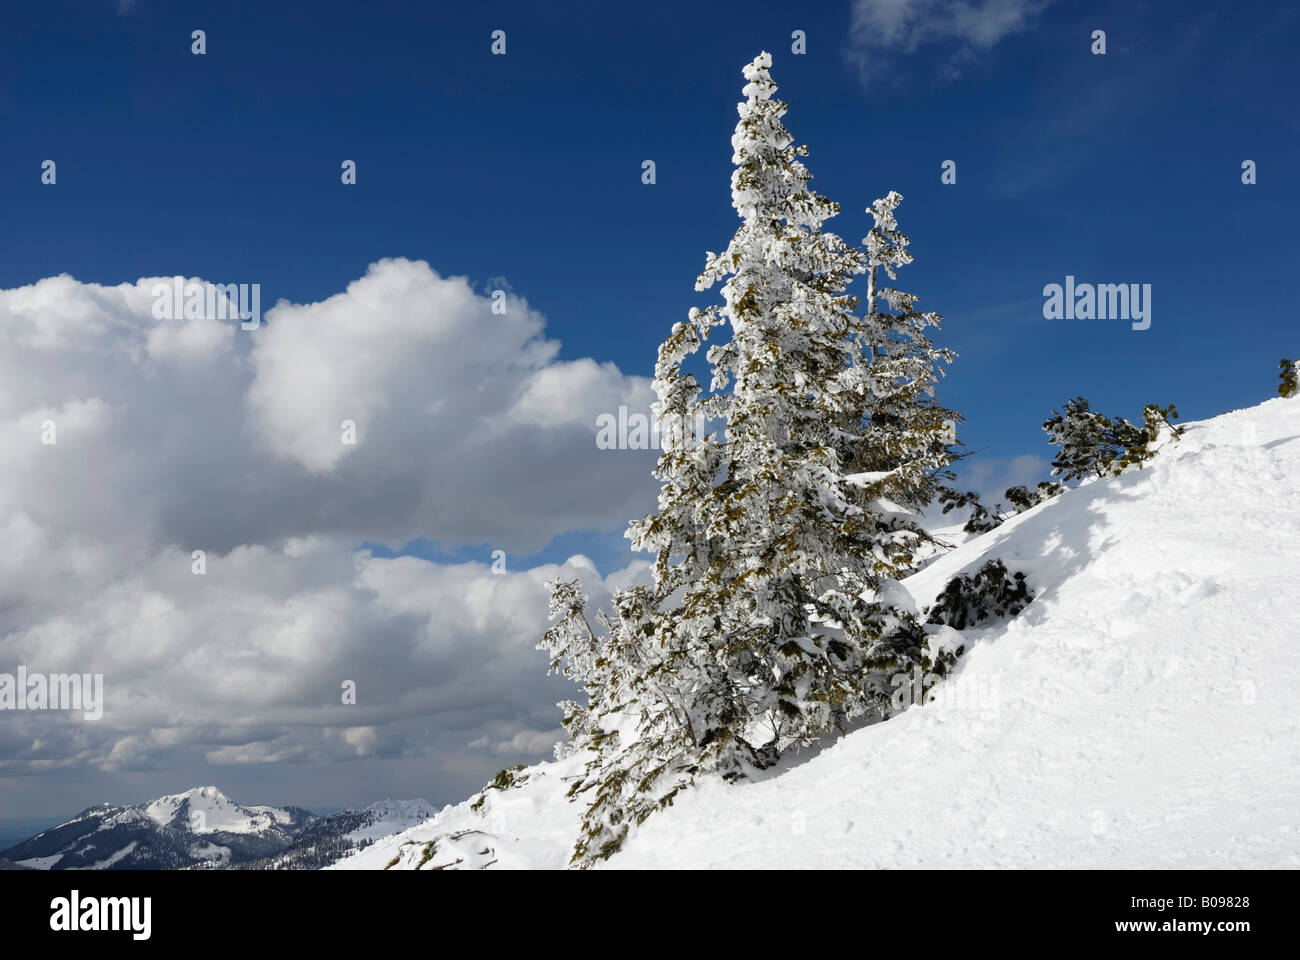 Snow-covered Norway Spruce (Picea abies), Chiemgau, Bavarian Alps, Bavaria, Germany Stock Photo